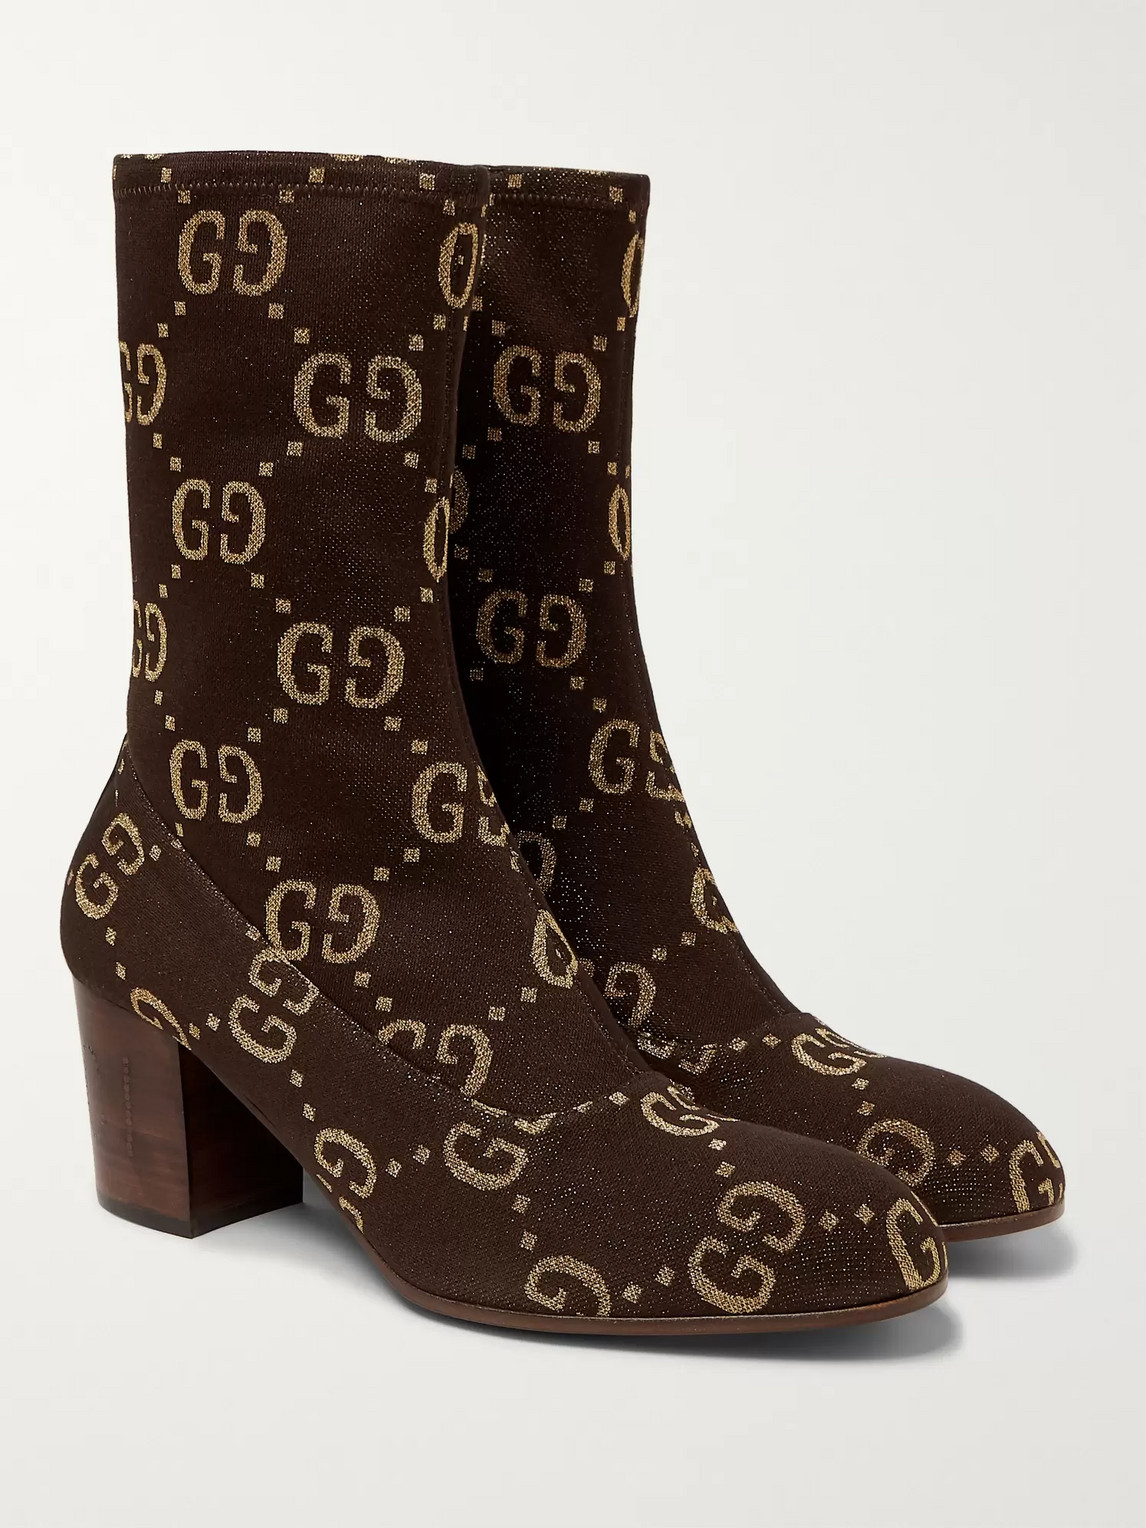 GUCCI LEATHER-TRIMMED LOGO-JACQUARD BOOTS